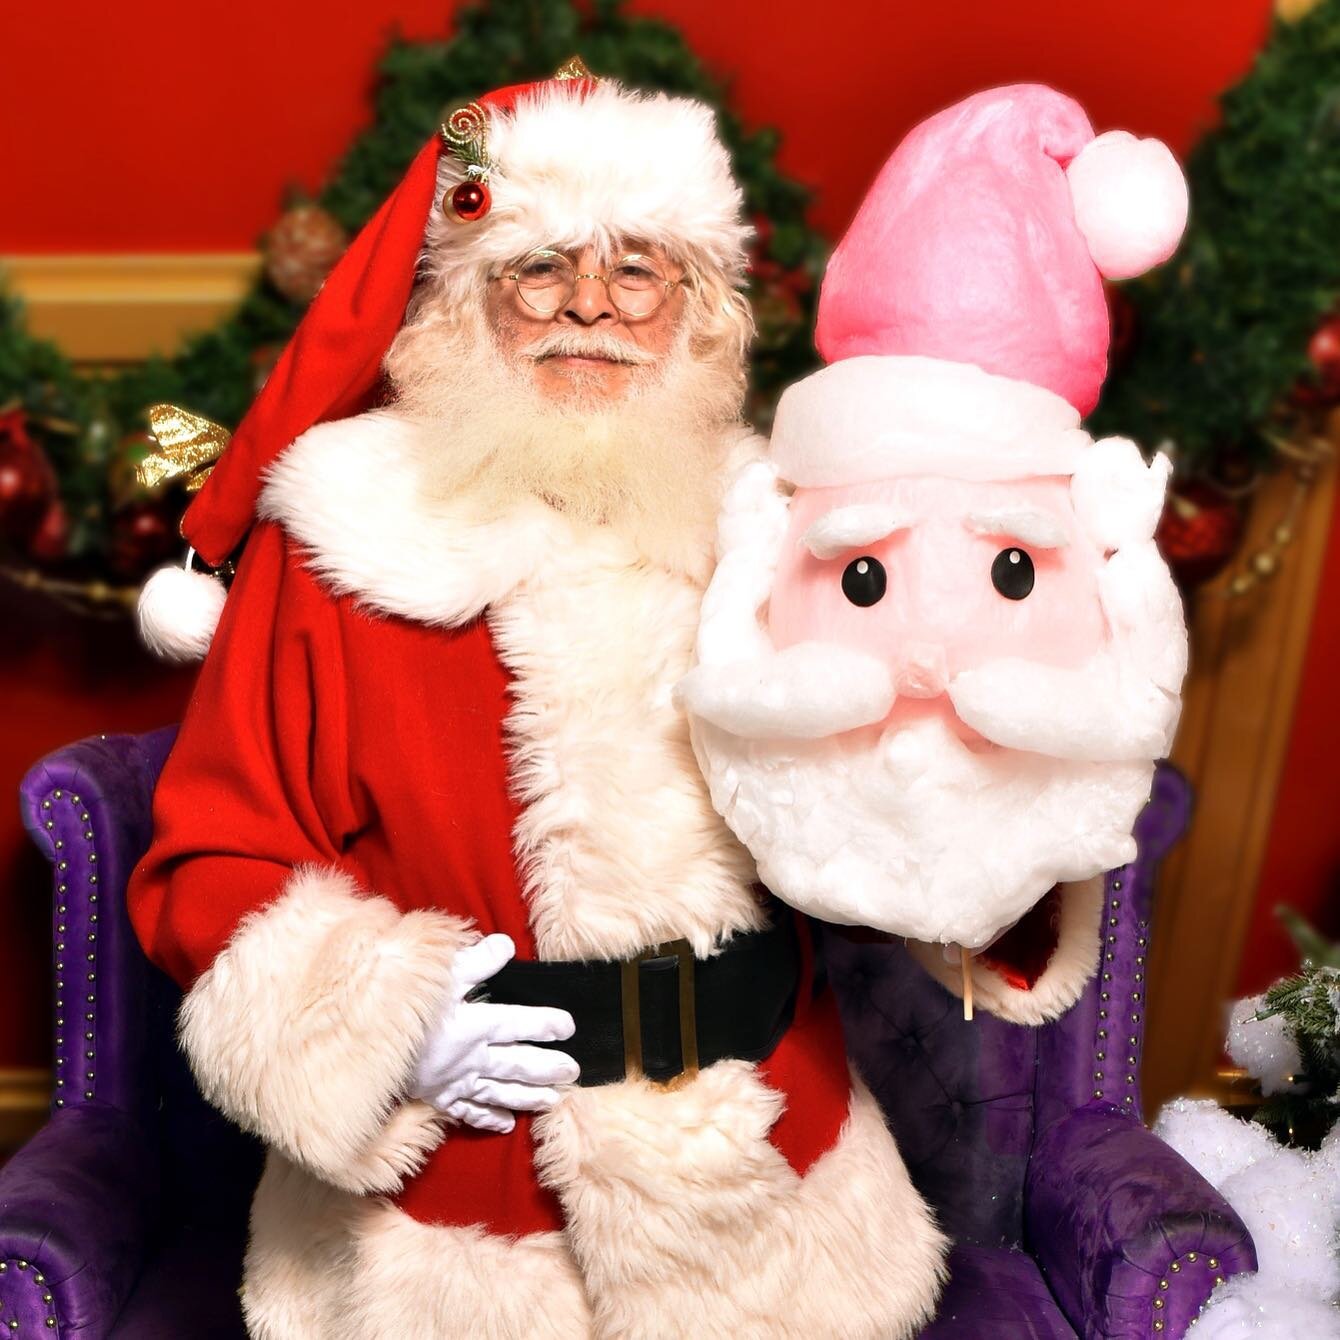 We&rsquo;re treating Santa to one of our Cotton Candy creations!